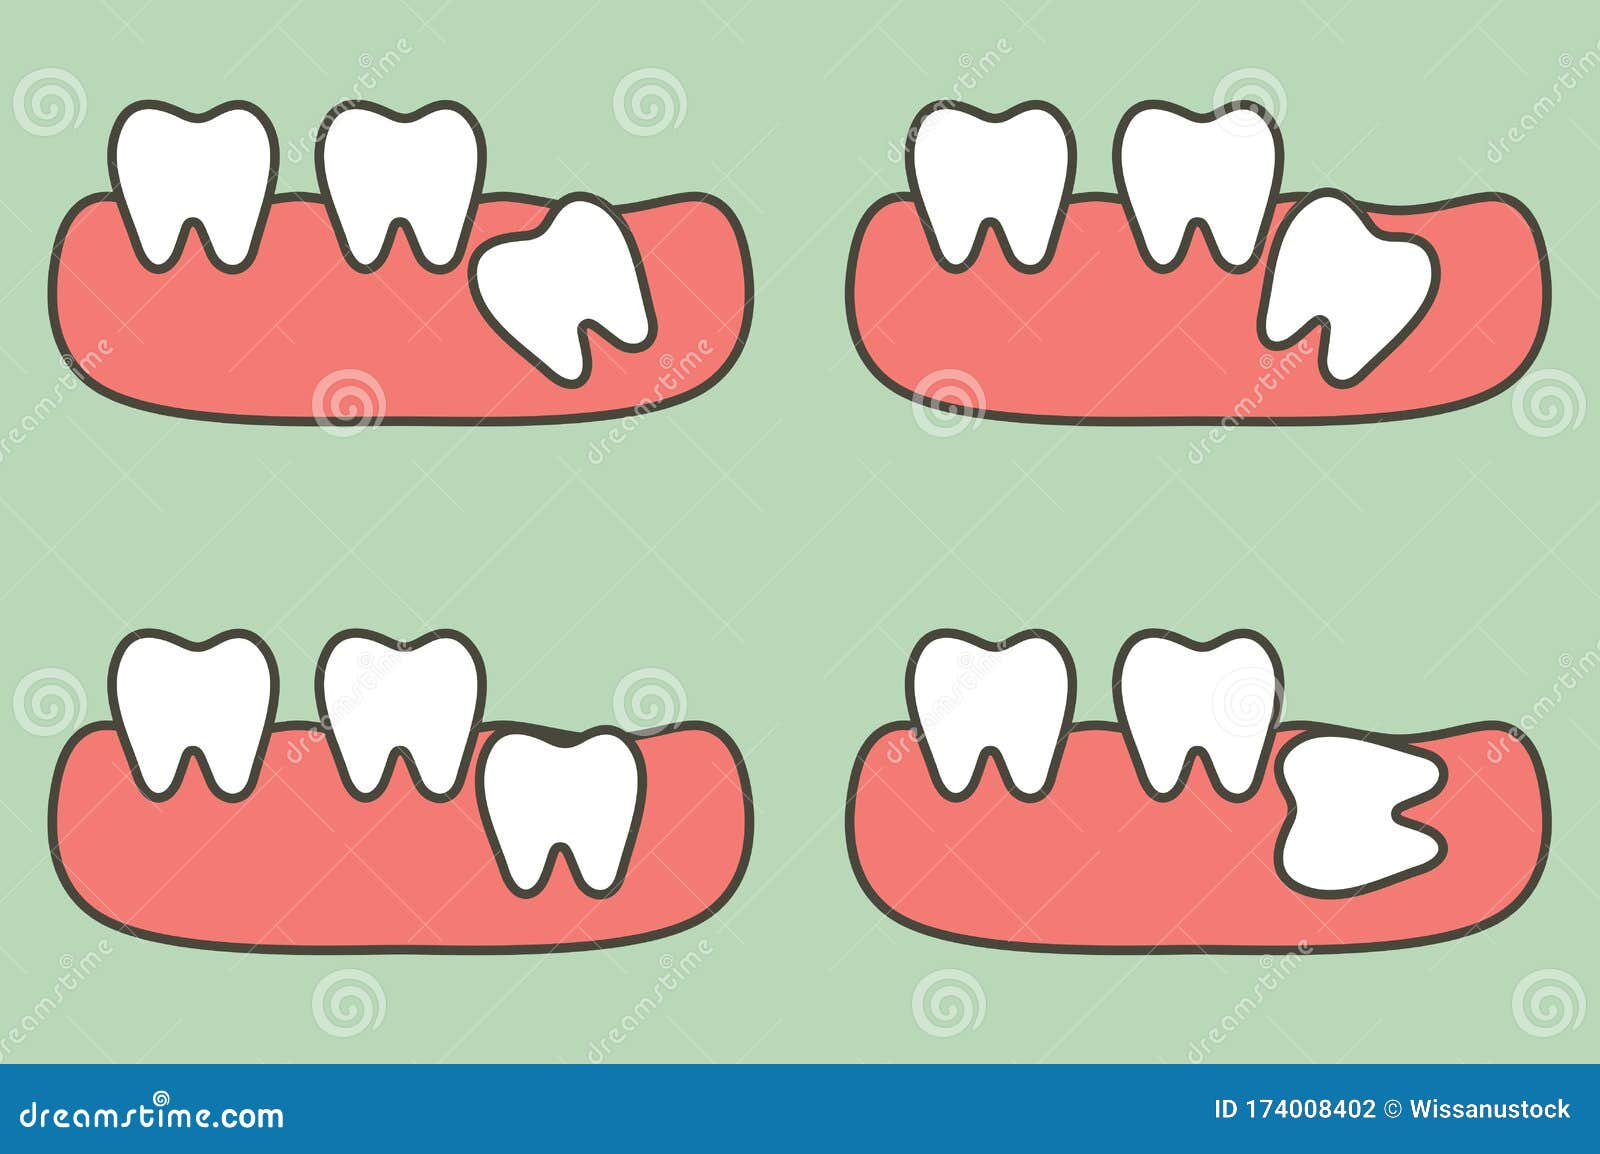 Type Of Wisdom Tooth Affect To Other Teeth Stock Vector ...